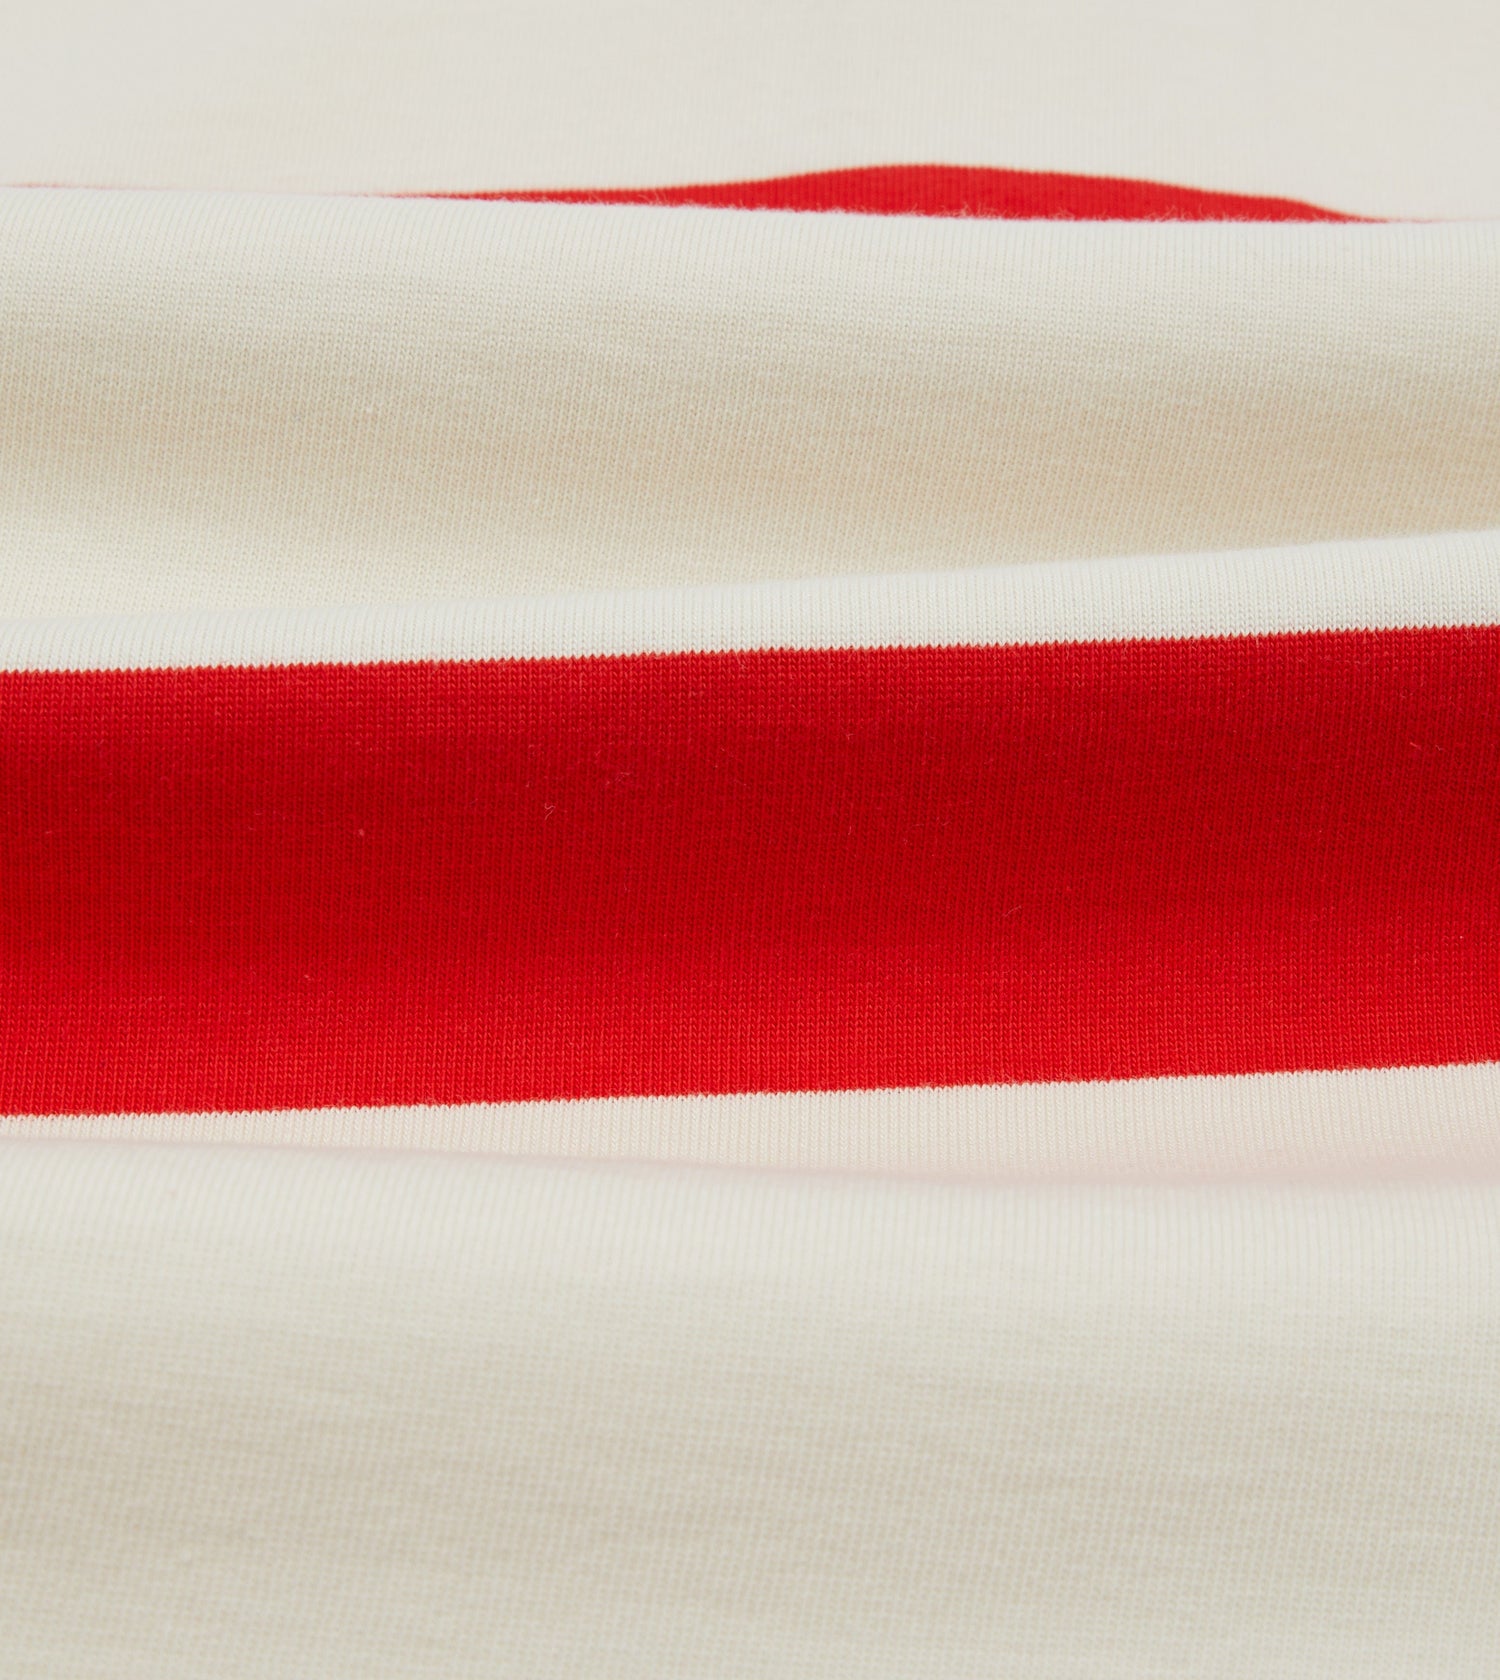 White and Red Stripe Cotton Rugby Shirt